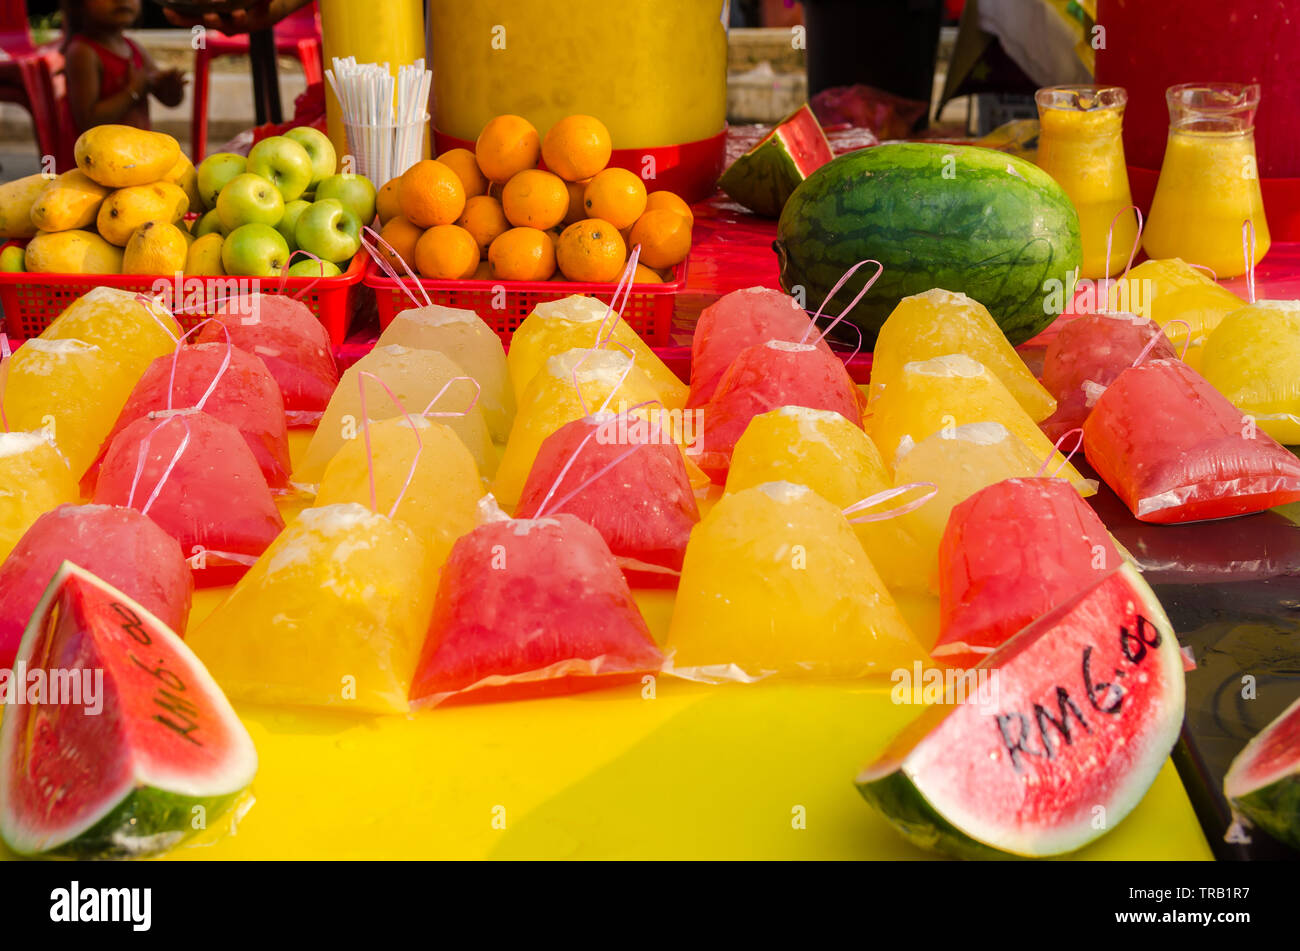 Different type of fruit juices selling in Ramadan Bazaar Kuala Lumpur. It is established for muslim to break fast during the holy month of Ramadan Stock Photo